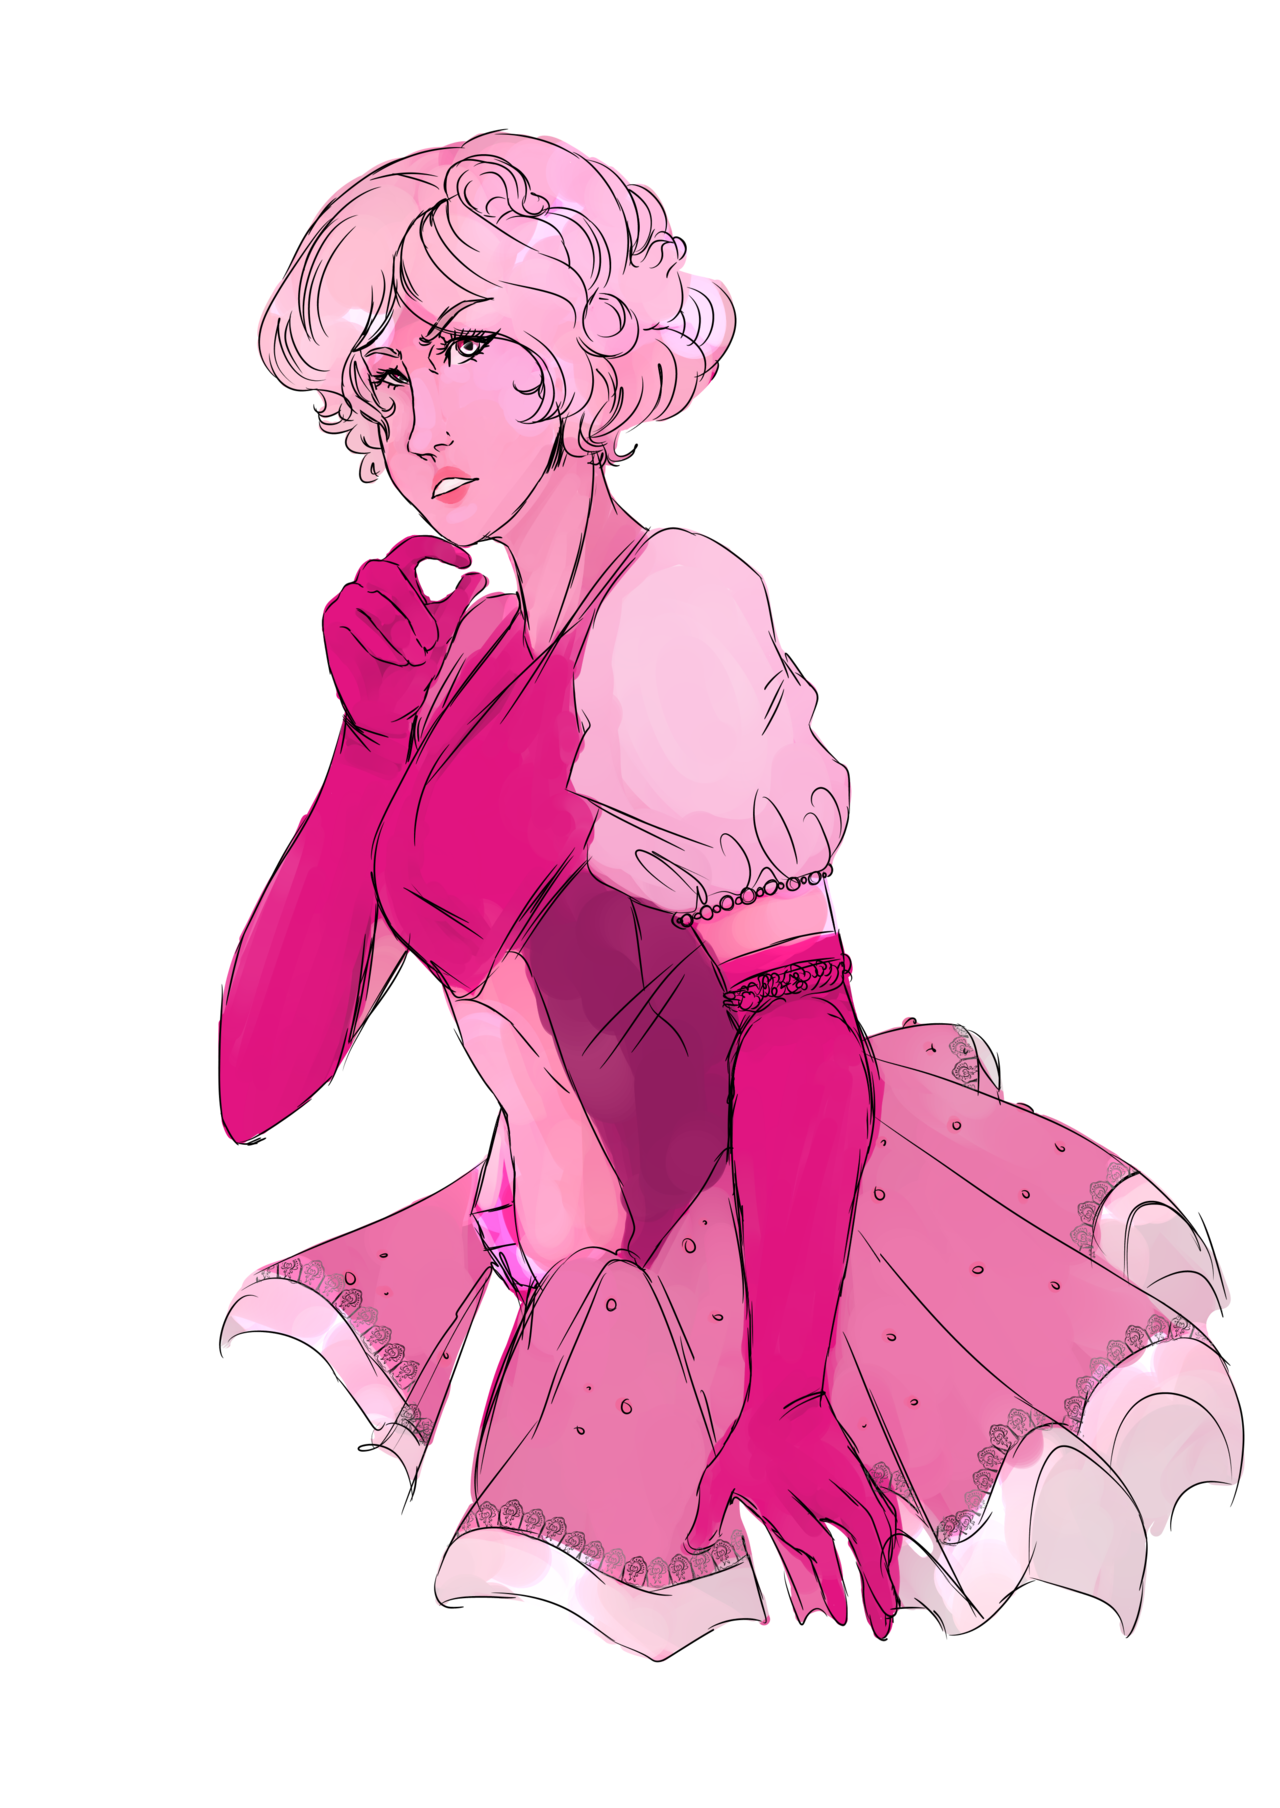 sketched a quick pink diamond, heavily inspired by @itskelpie‘ s beautiful cosplay im not creative enough for a background im sorry